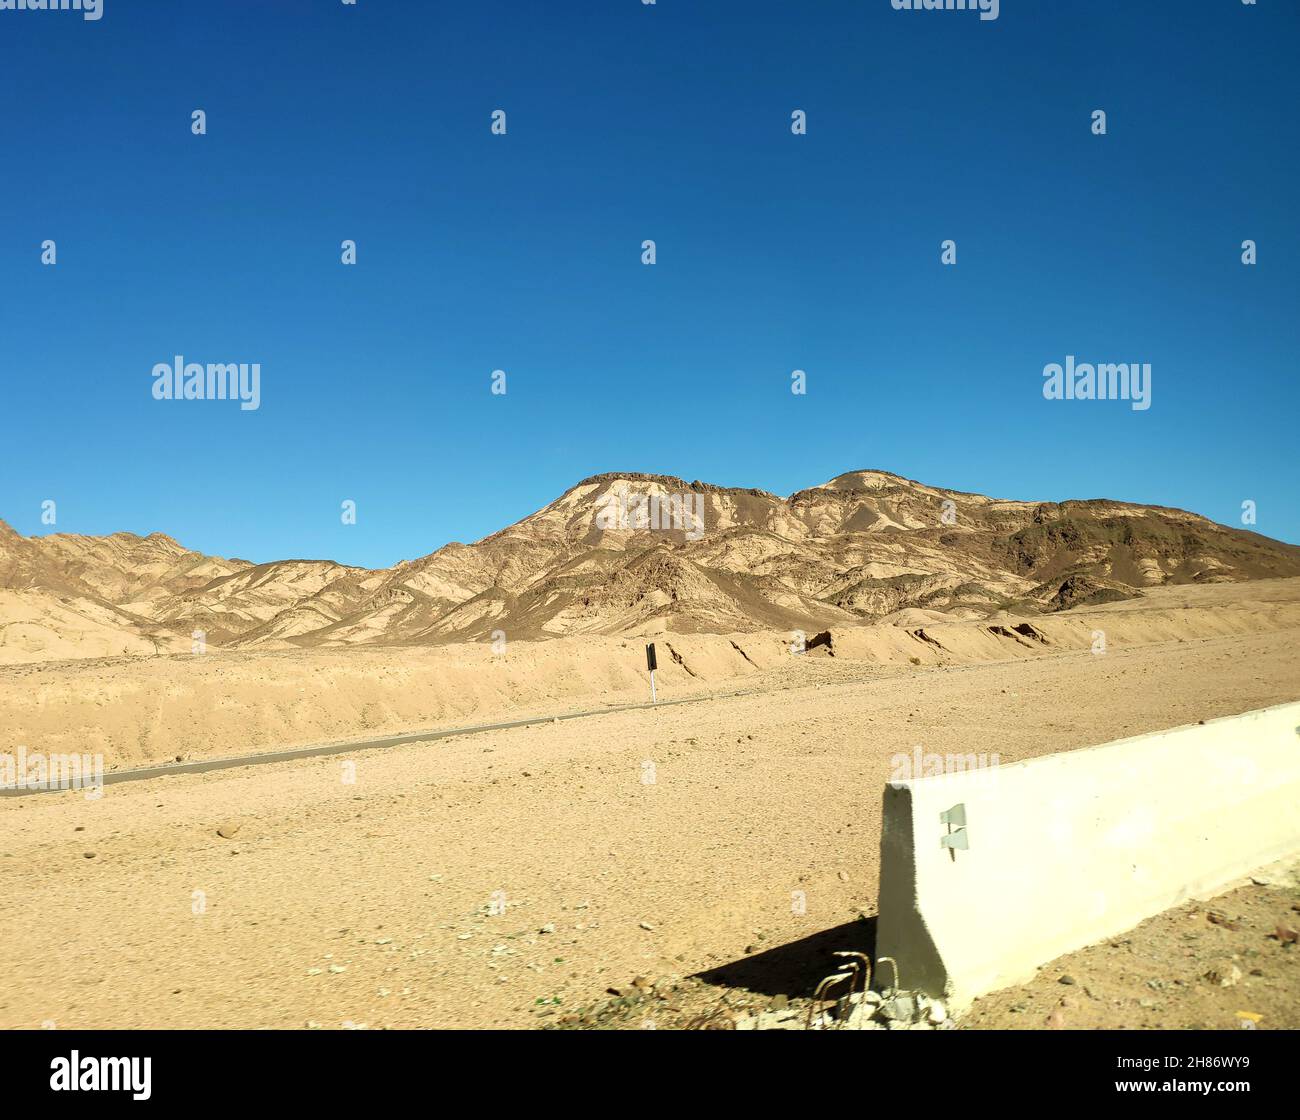 Border line in the desert, picturesque background with mountains and hills, desert landscape wallpaper Stock Photo